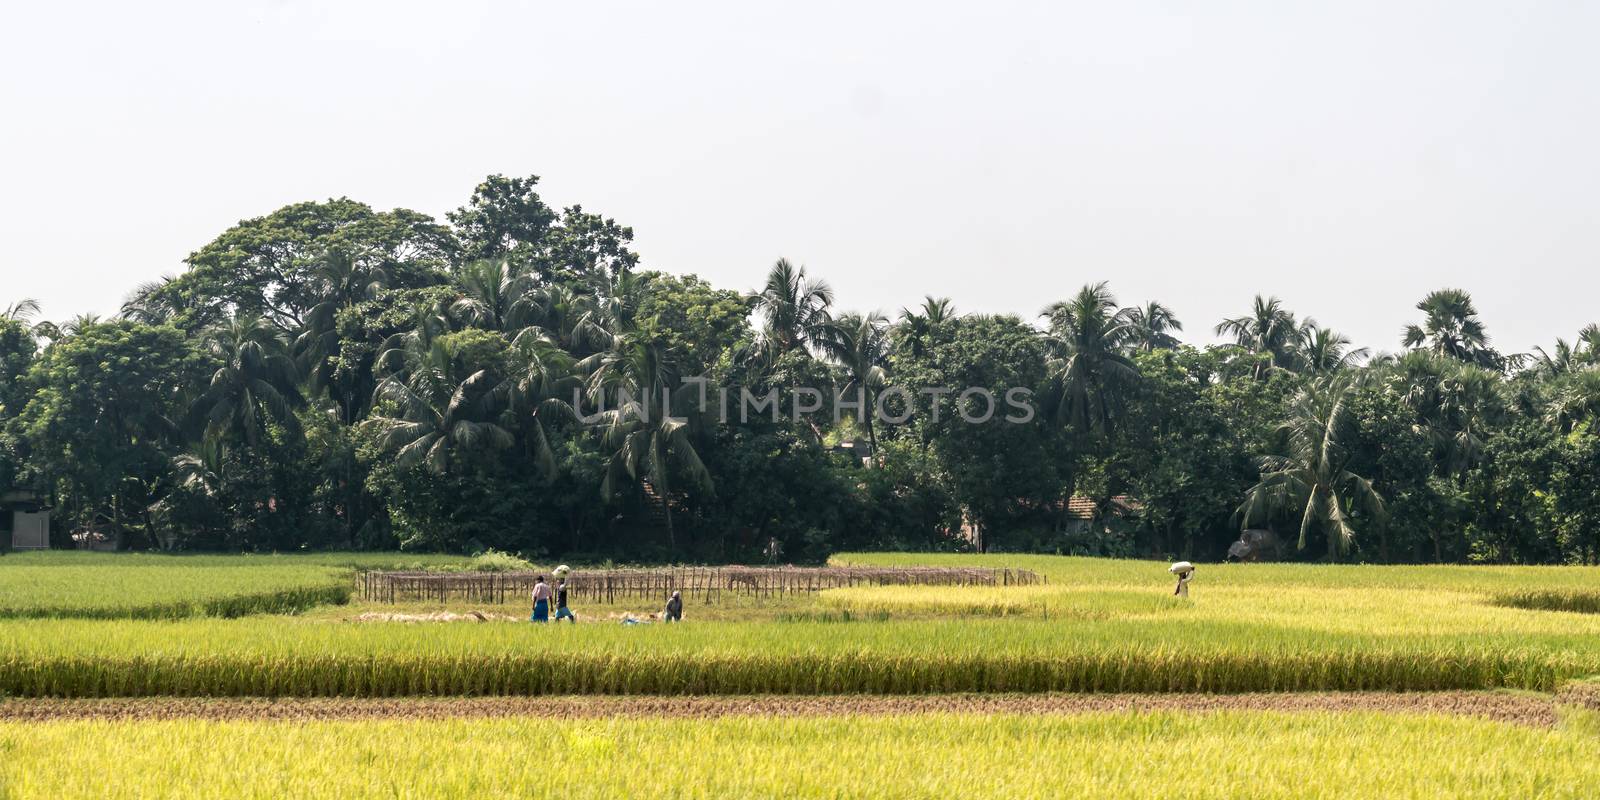 Rice paddy on green spring meadow. Countryside Agricultural field background. Agriculture greenery with cereal crop. Beautiful nature landscape scenery of a Rural India village at summer sunset time by sudiptabhowmick